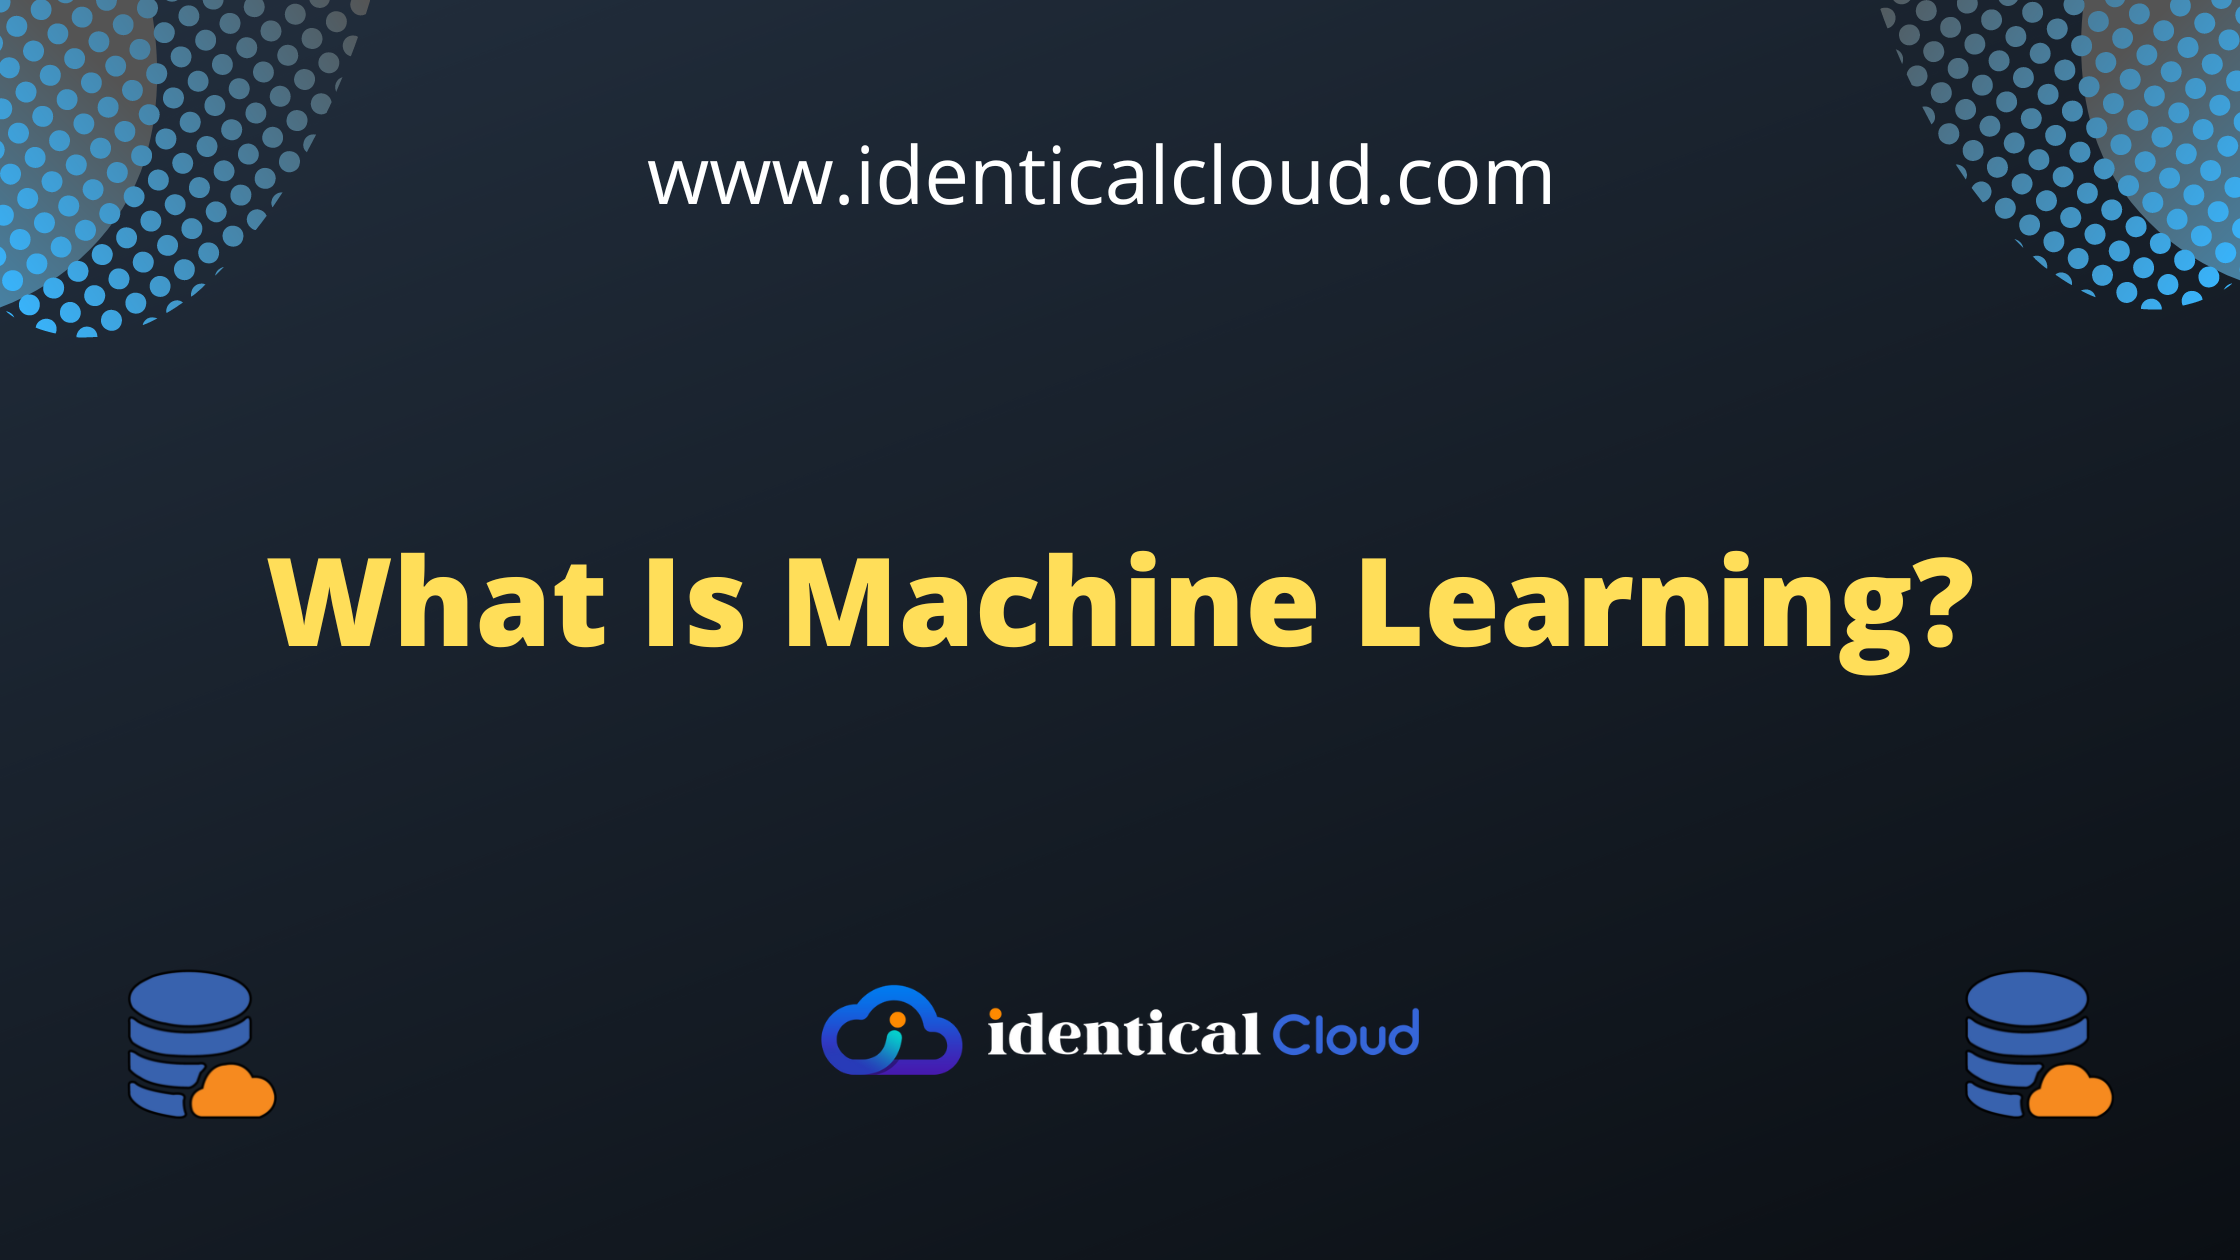 What Is Machine Learning? - identicalcloud.com